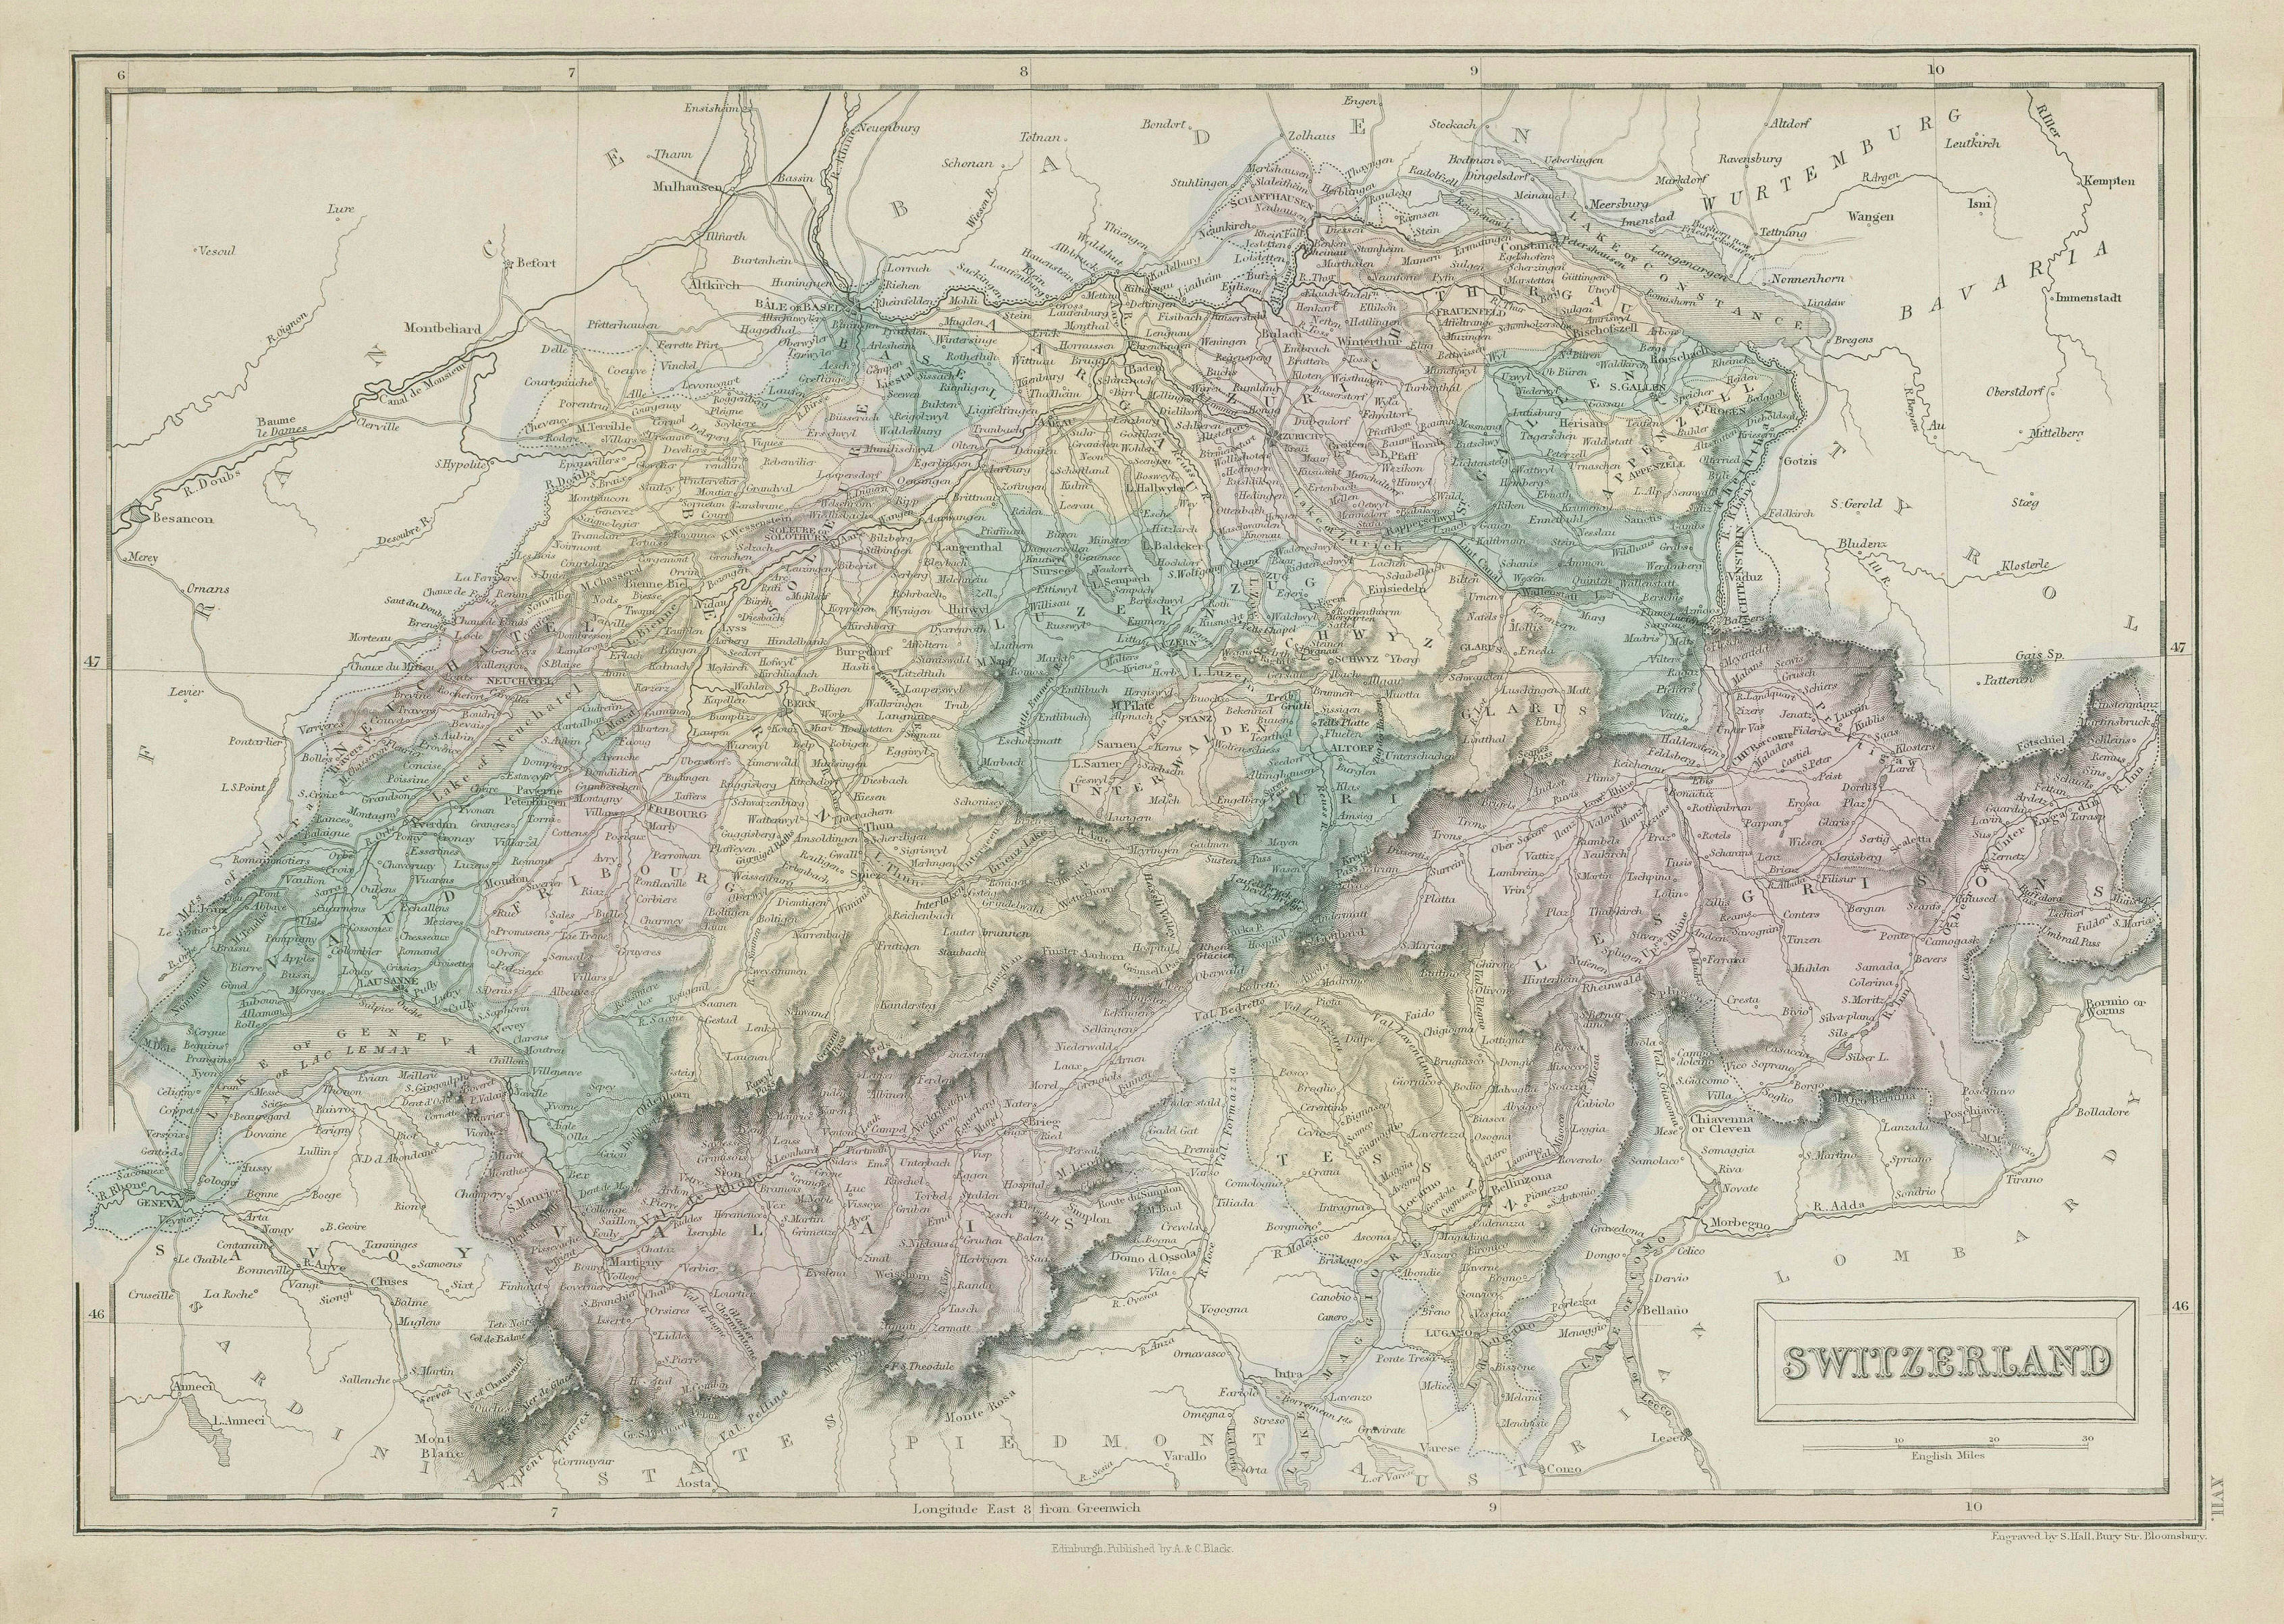 Associate Product Switzerland showing cantons, rivers & roads. SIDNEY HALL 1856 old antique map